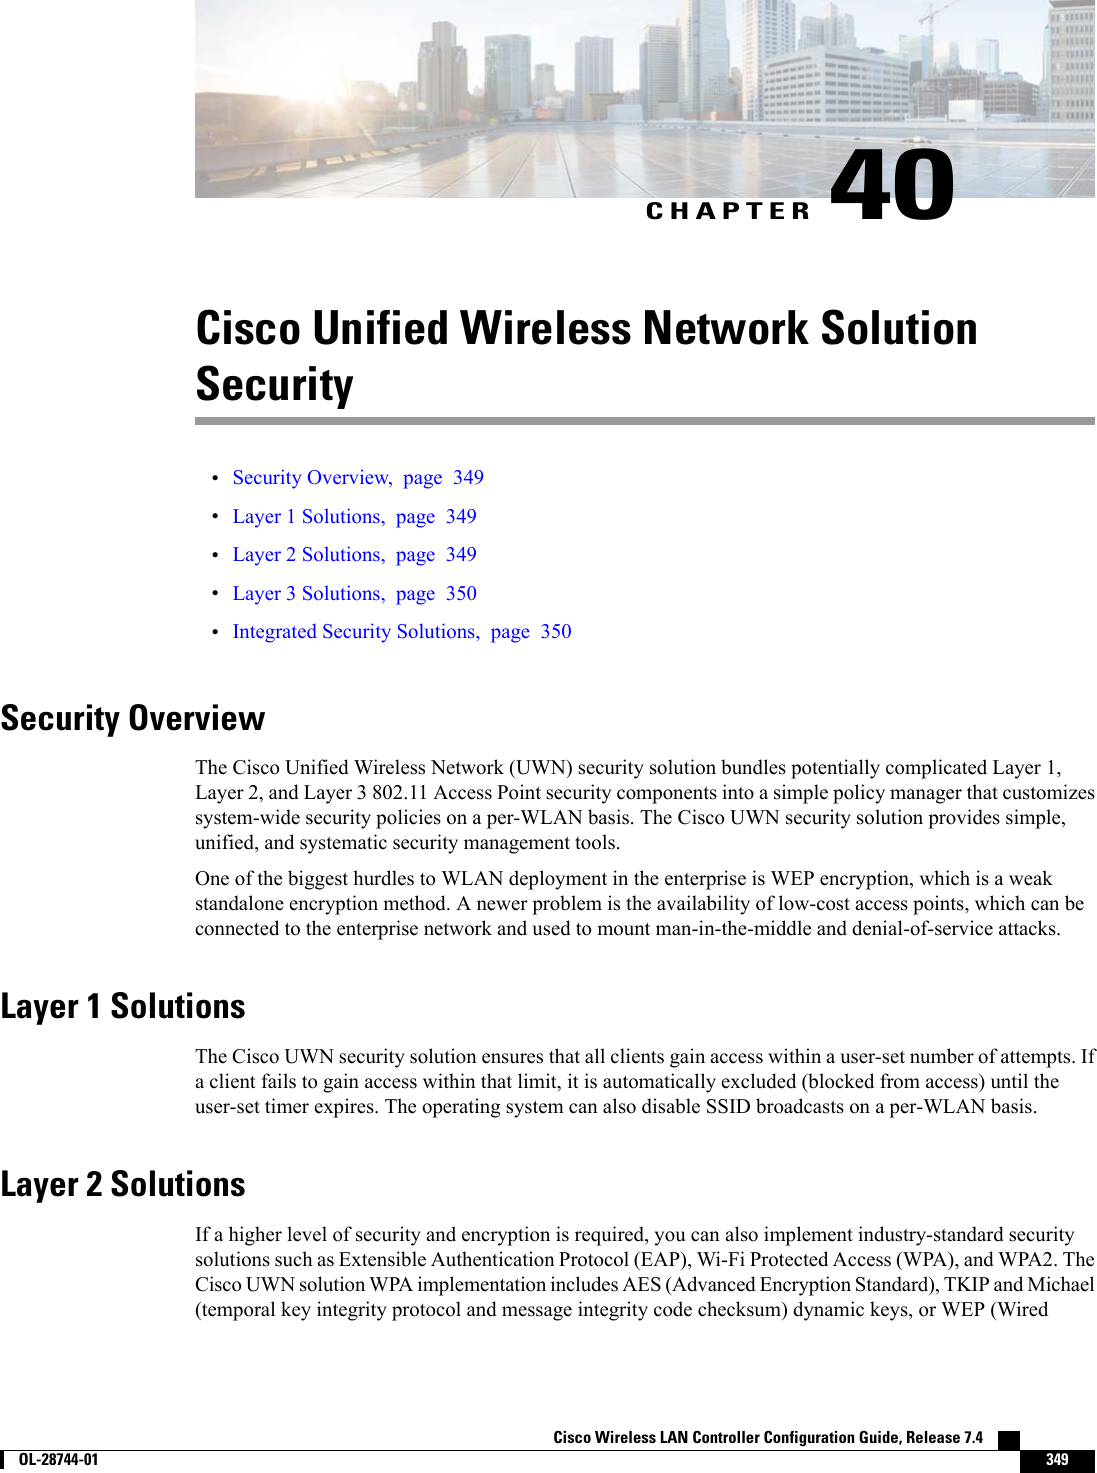 CHAPTER 40Cisco Unified Wireless Network SolutionSecurity•Security Overview, page 349•Layer 1 Solutions, page 349•Layer 2 Solutions, page 349•Layer 3 Solutions, page 350•Integrated Security Solutions, page 350Security OverviewThe Cisco Unified Wireless Network (UWN) security solution bundles potentially complicated Layer 1,Layer 2, and Layer 3 802.11 Access Point security components into a simple policy manager that customizessystem-wide security policies on a per-WLAN basis. The Cisco UWN security solution provides simple,unified, and systematic security management tools.One of the biggest hurdles to WLAN deployment in the enterprise is WEP encryption, which is a weakstandalone encryption method. A newer problem is the availability of low-cost access points, which can beconnected to the enterprise network and used to mount man-in-the-middle and denial-of-service attacks.Layer 1 SolutionsThe Cisco UWN security solution ensures that all clients gain access within a user-set number of attempts. Ifa client fails to gain access within that limit, it is automatically excluded (blocked from access) until theuser-set timer expires. The operating system can also disable SSID broadcasts on a per-WLAN basis.Layer 2 SolutionsIf a higher level of security and encryption is required, you can also implement industry-standard securitysolutions such as Extensible Authentication Protocol (EAP), Wi-Fi Protected Access (WPA), and WPA2. TheCisco UWN solution WPA implementation includes AES (Advanced Encryption Standard), TKIP and Michael(temporal key integrity protocol and message integrity code checksum) dynamic keys, or WEP (WiredCisco Wireless LAN Controller Configuration Guide, Release 7.4        OL-28744-01 349